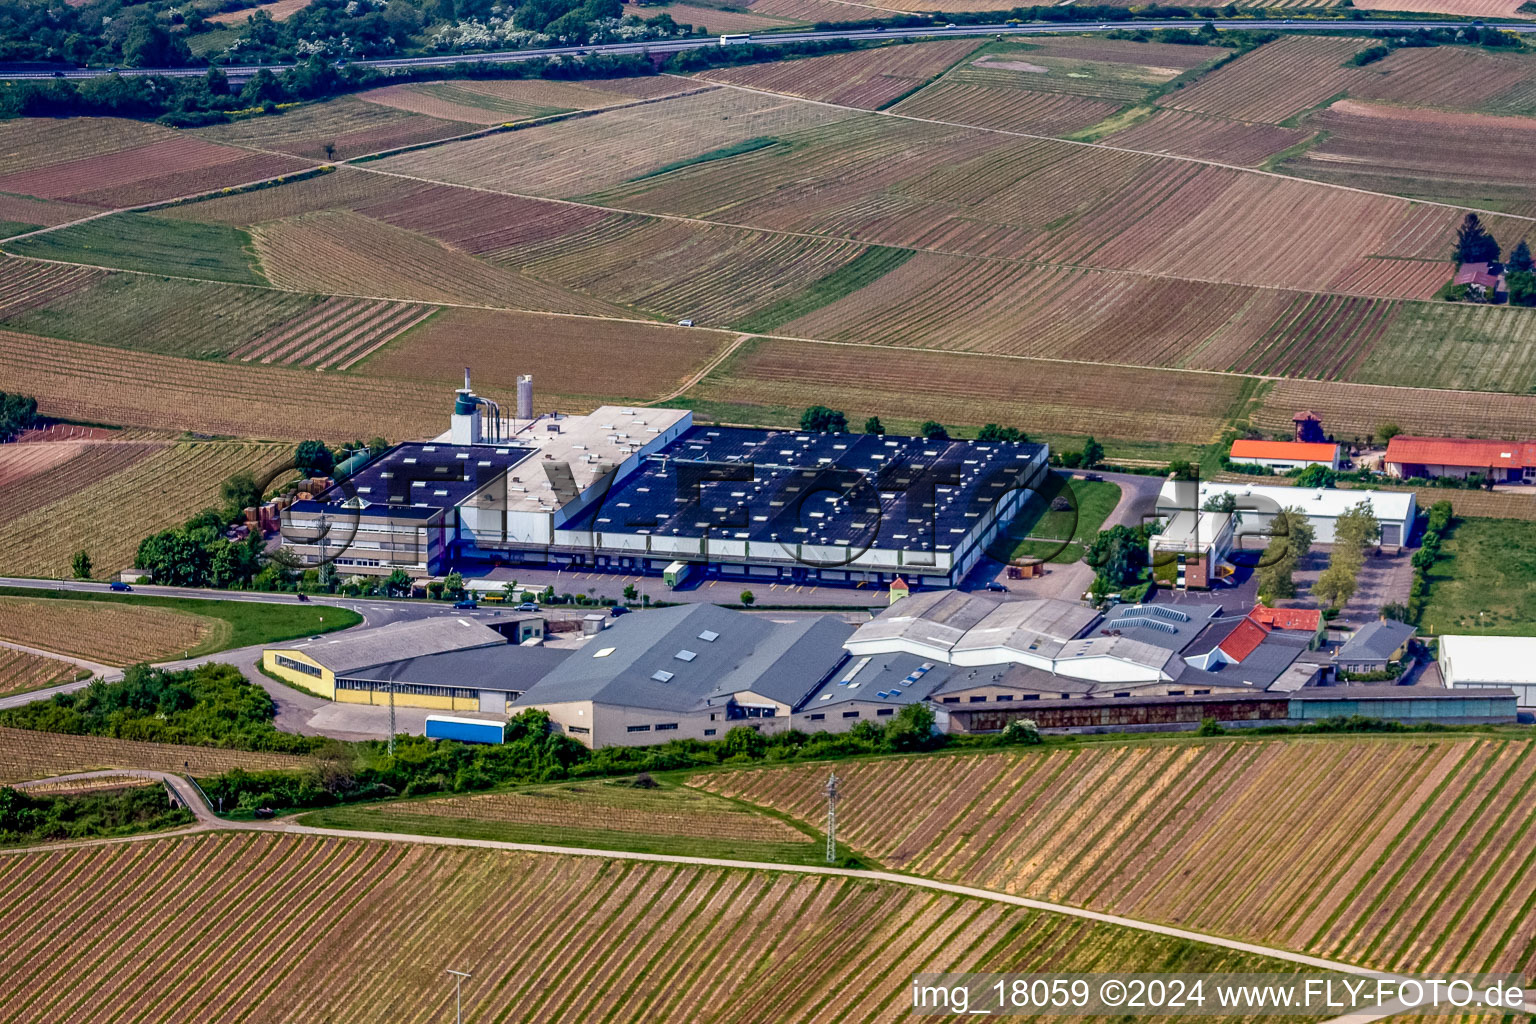 Aerial photograpy of Building and production halls on the premises of Wellpappenfabrik GmbH in the district Sausenheim in Gruenstadt in the state Rhineland-Palatinate, Germany